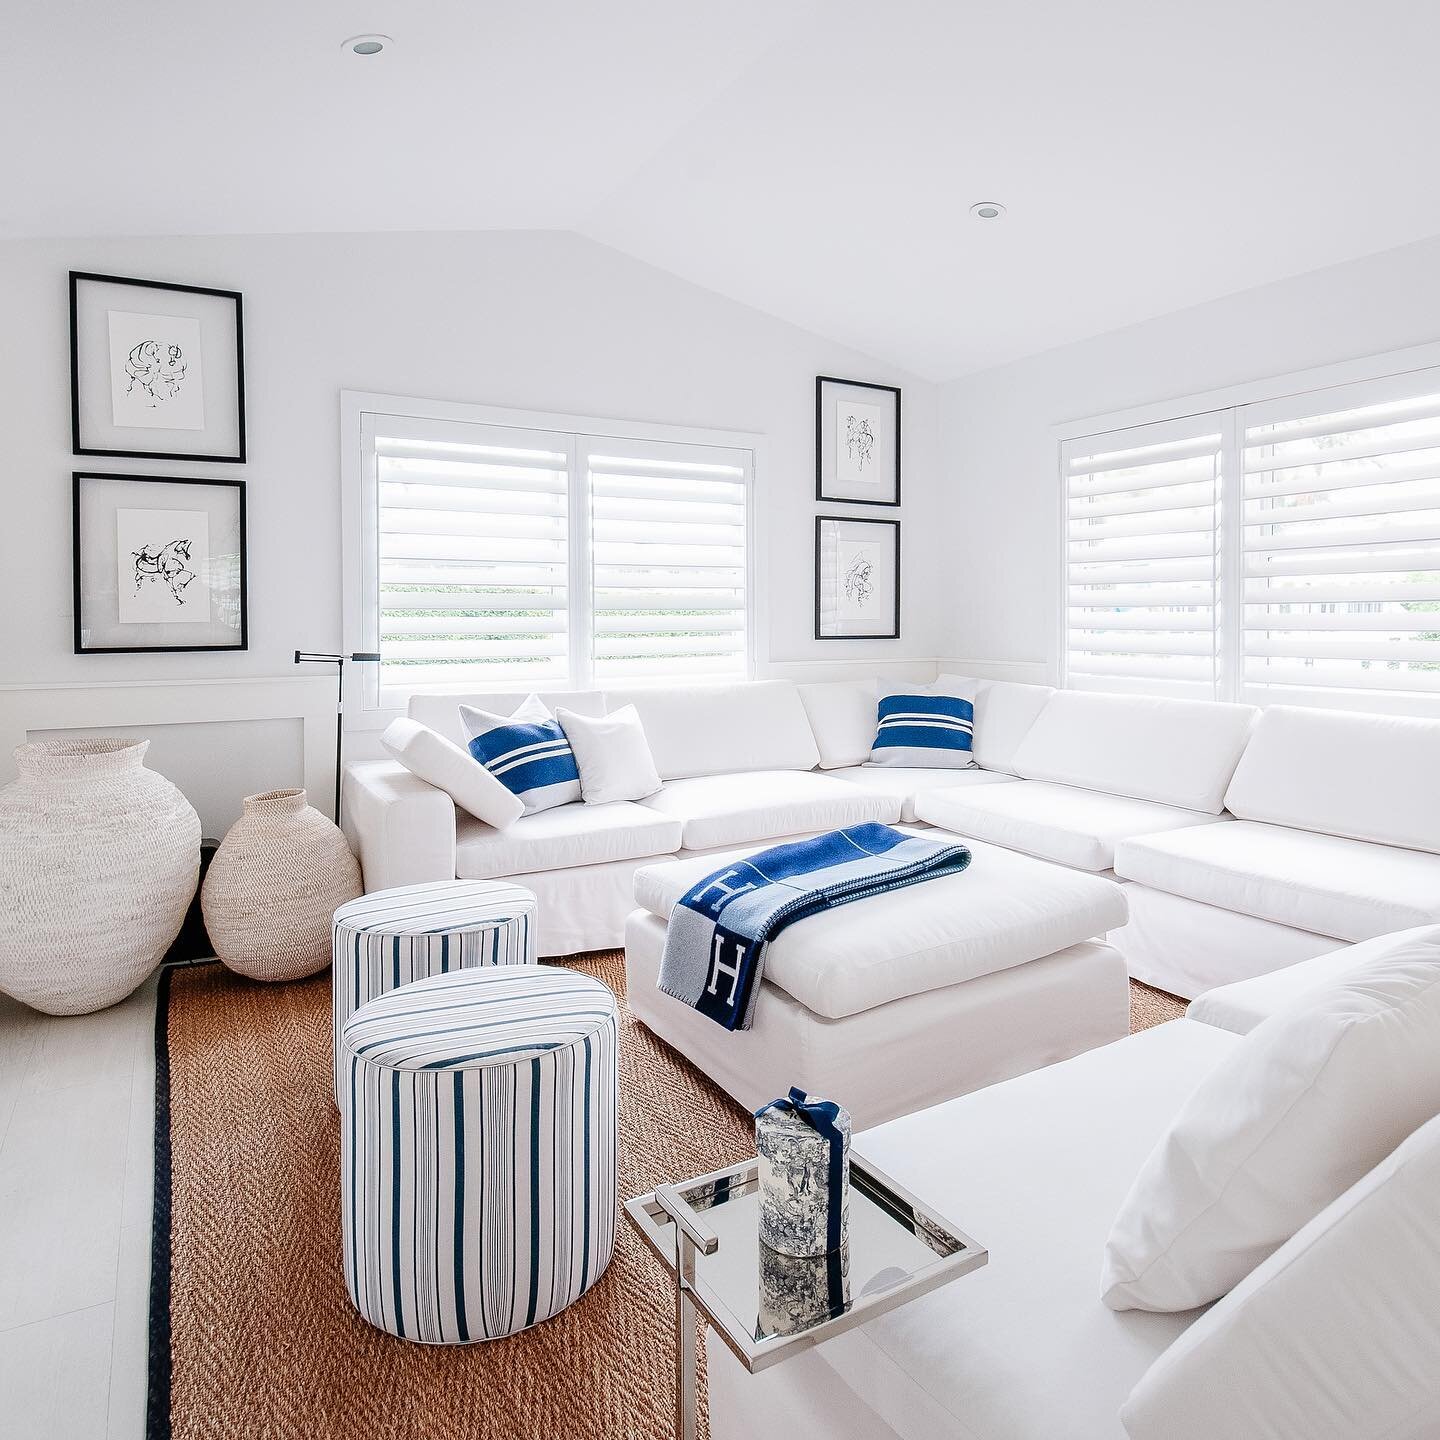 A minimalistic #Hamptons vibe 🤍💙

Adore this house and client! Home completed for @shopsavvy_solemate via mobile design 📲

Photo by @ysv_photo 📸
&bull;
&bull;
&bull;

#InteriorDesign #InteriorDecor #InteriorDecorating #Interiors #Decorating #Inte